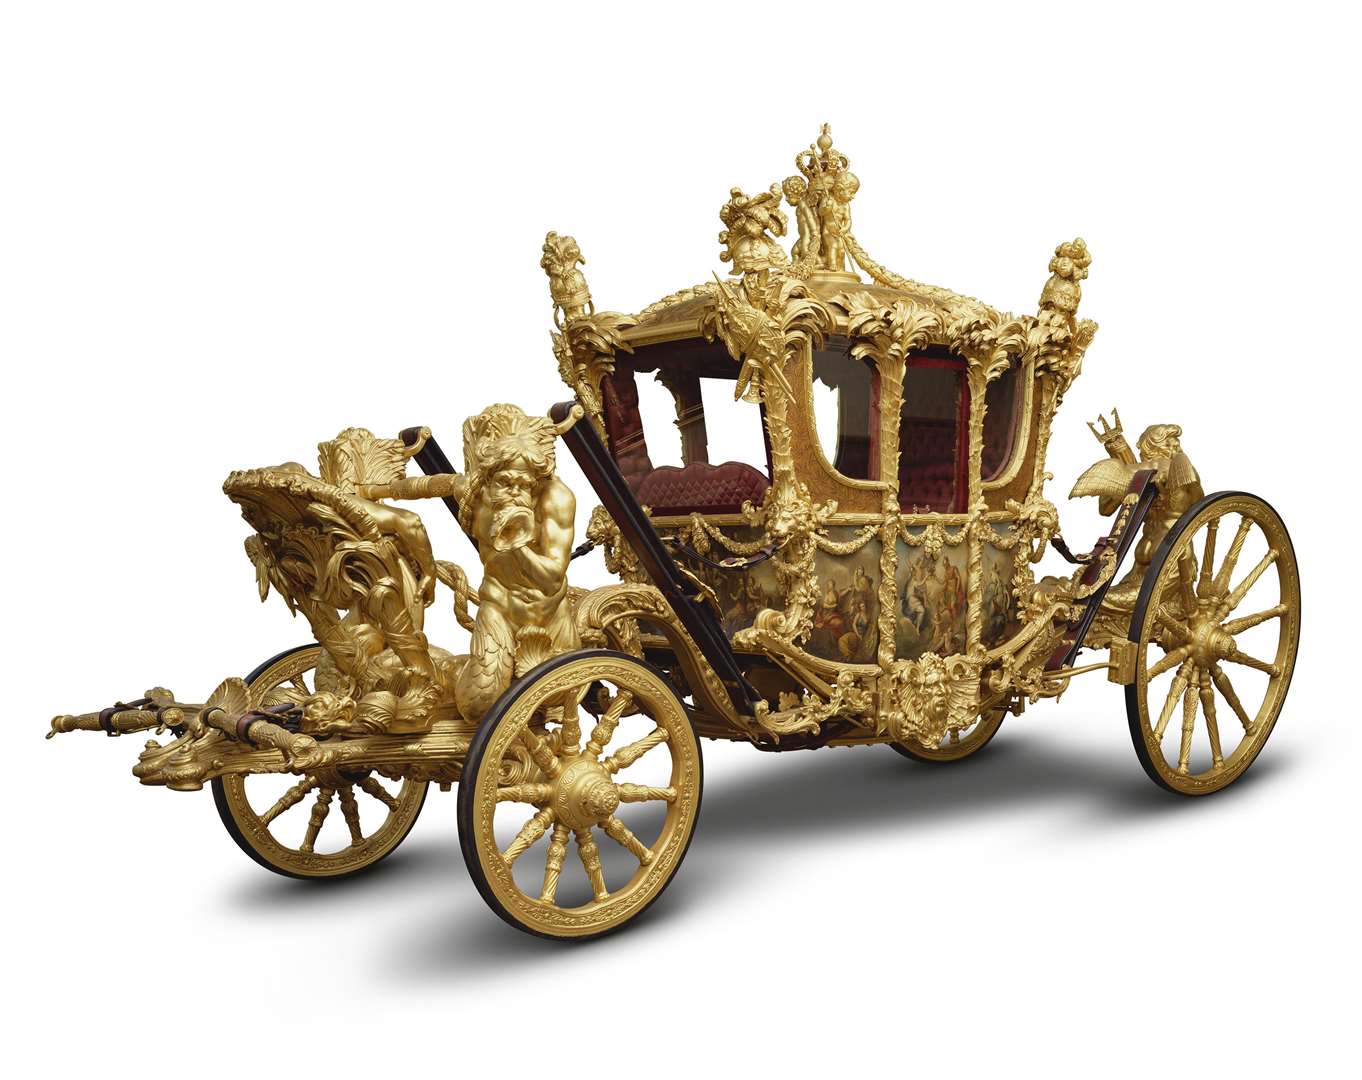 The Gold State Coach (Royal Collection Trust/PA)